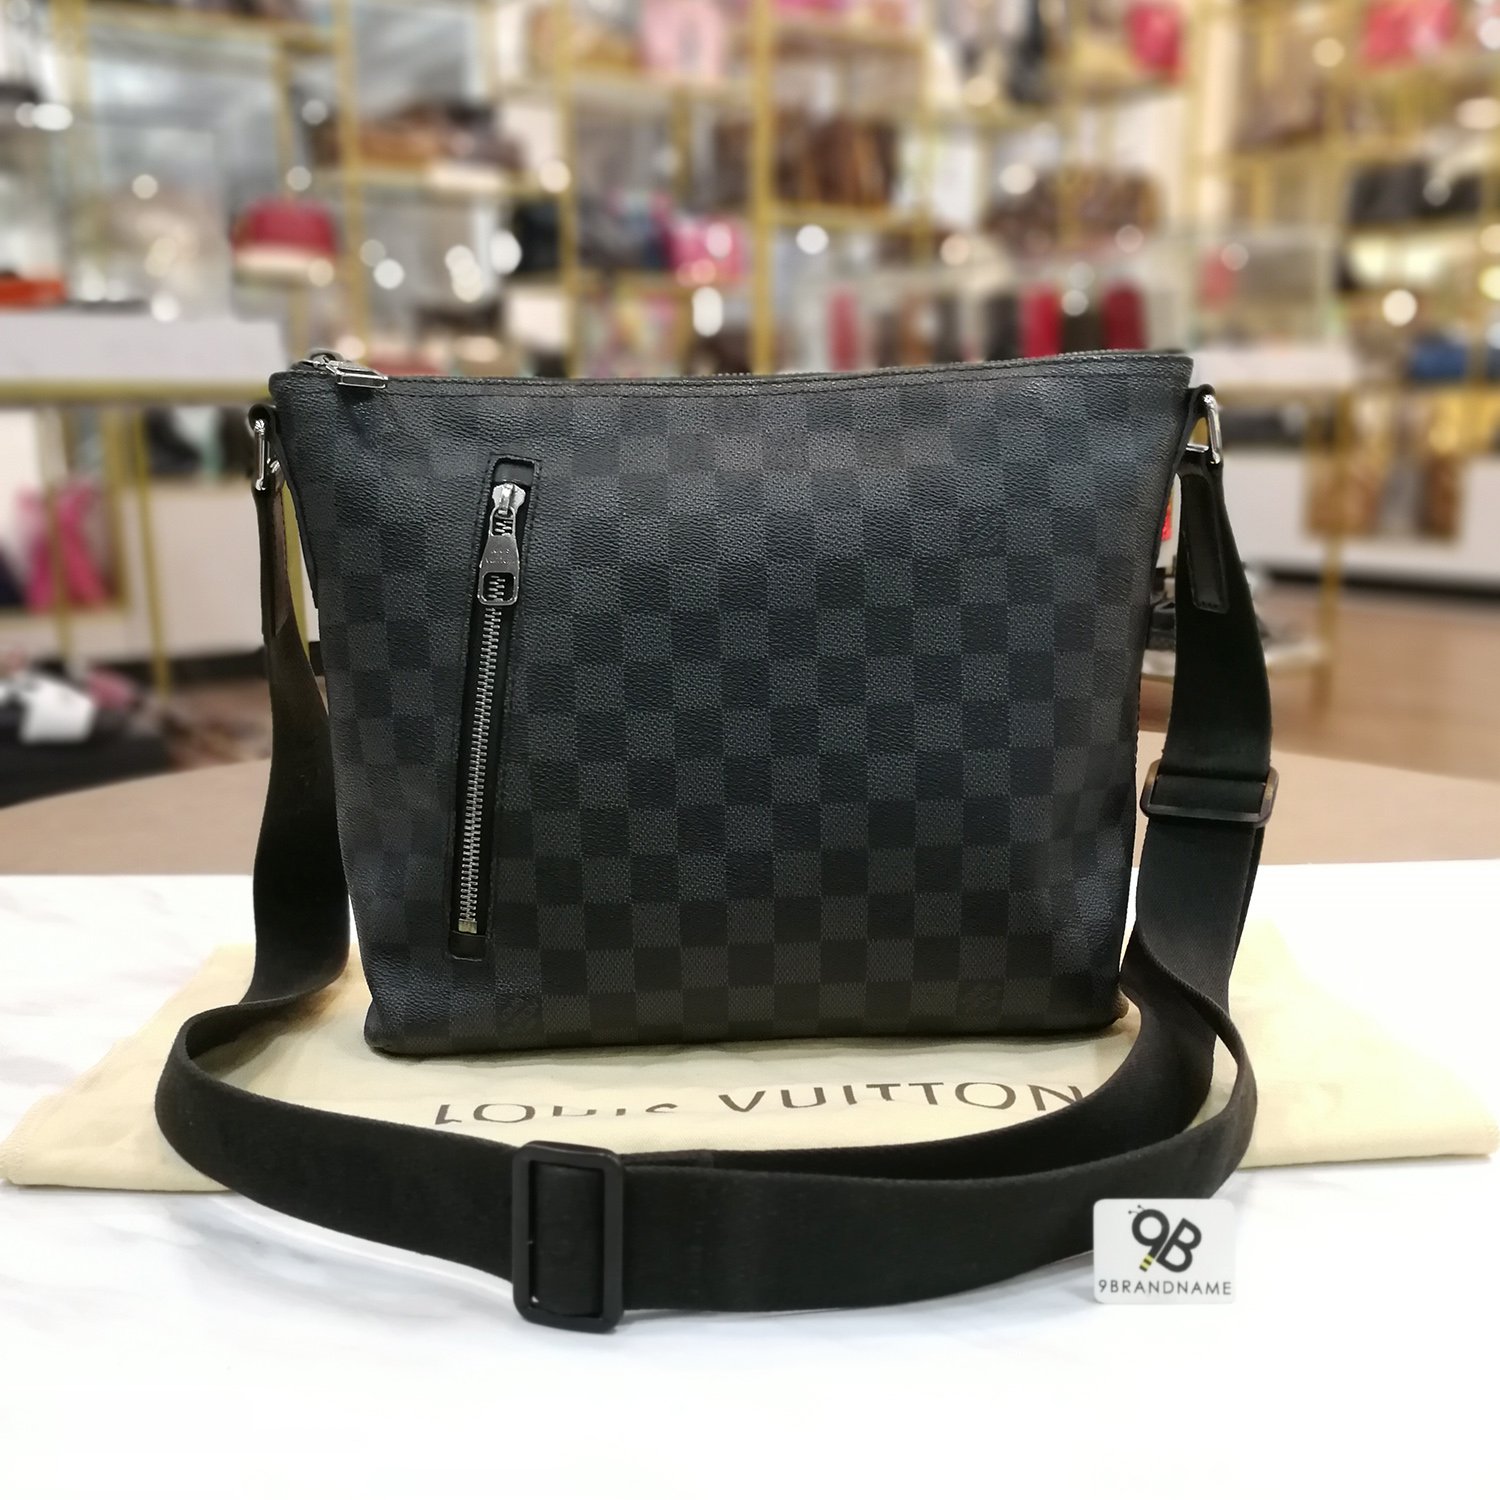 NEW - LV Damier Graphite Mick PM_Louis Vuitton_BRANDS_MILAN CLASSIC Luxury  Trade Company Since 2007